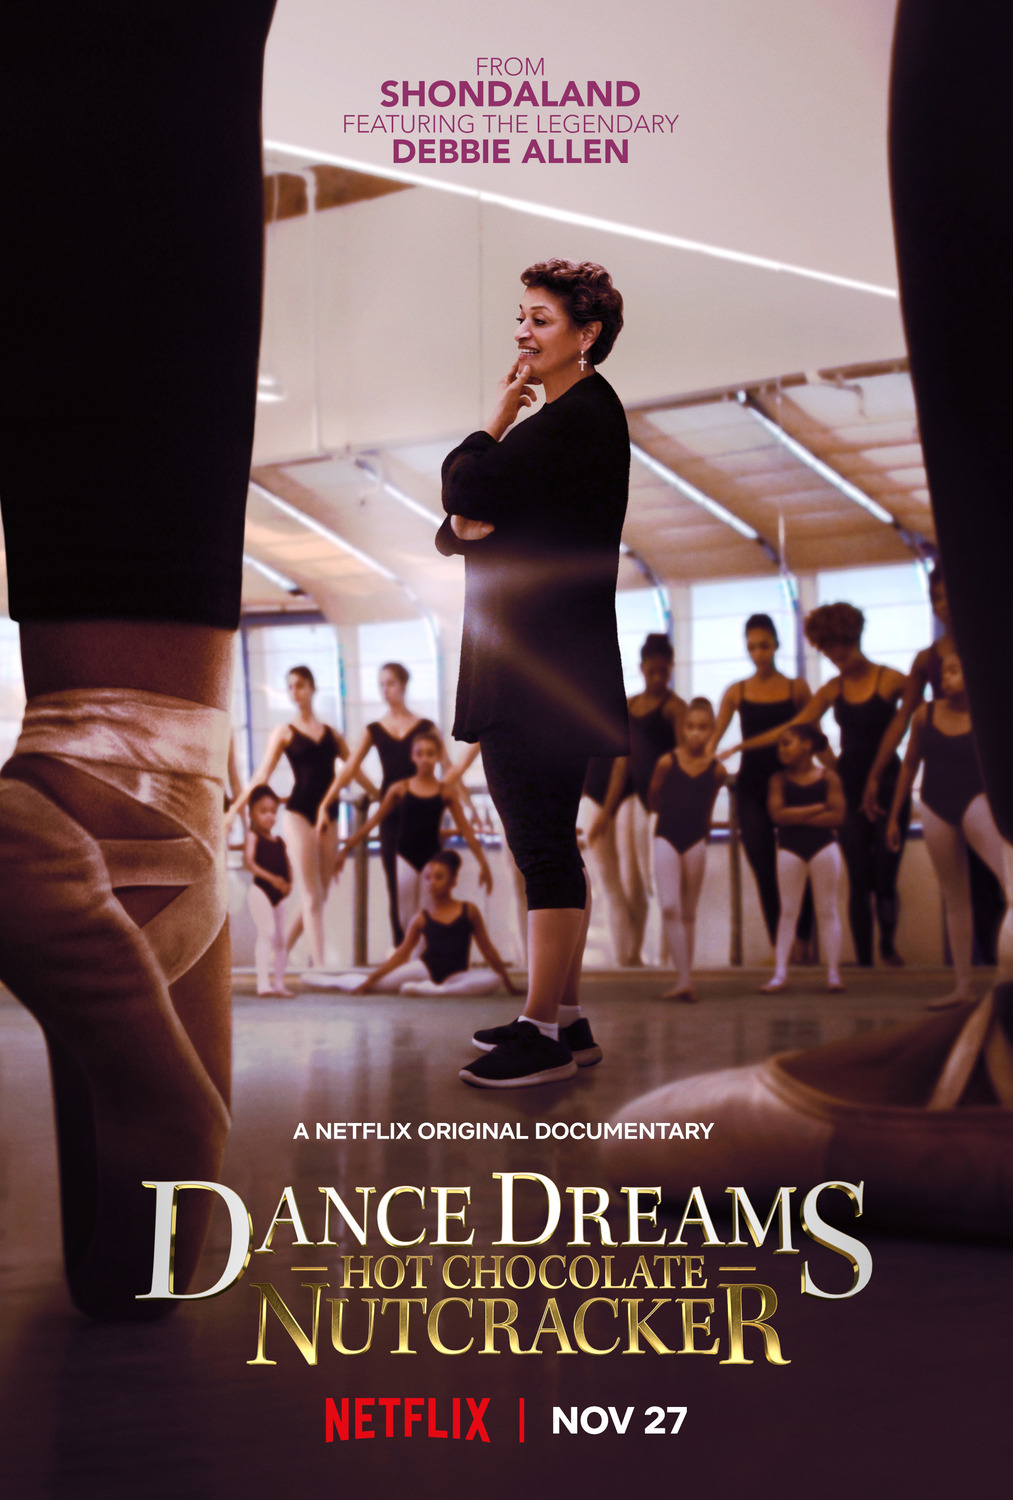 Dance Dreams: Hot Chocolate Nutcracker is an American documentary film directed by Oliver Bokelberg.